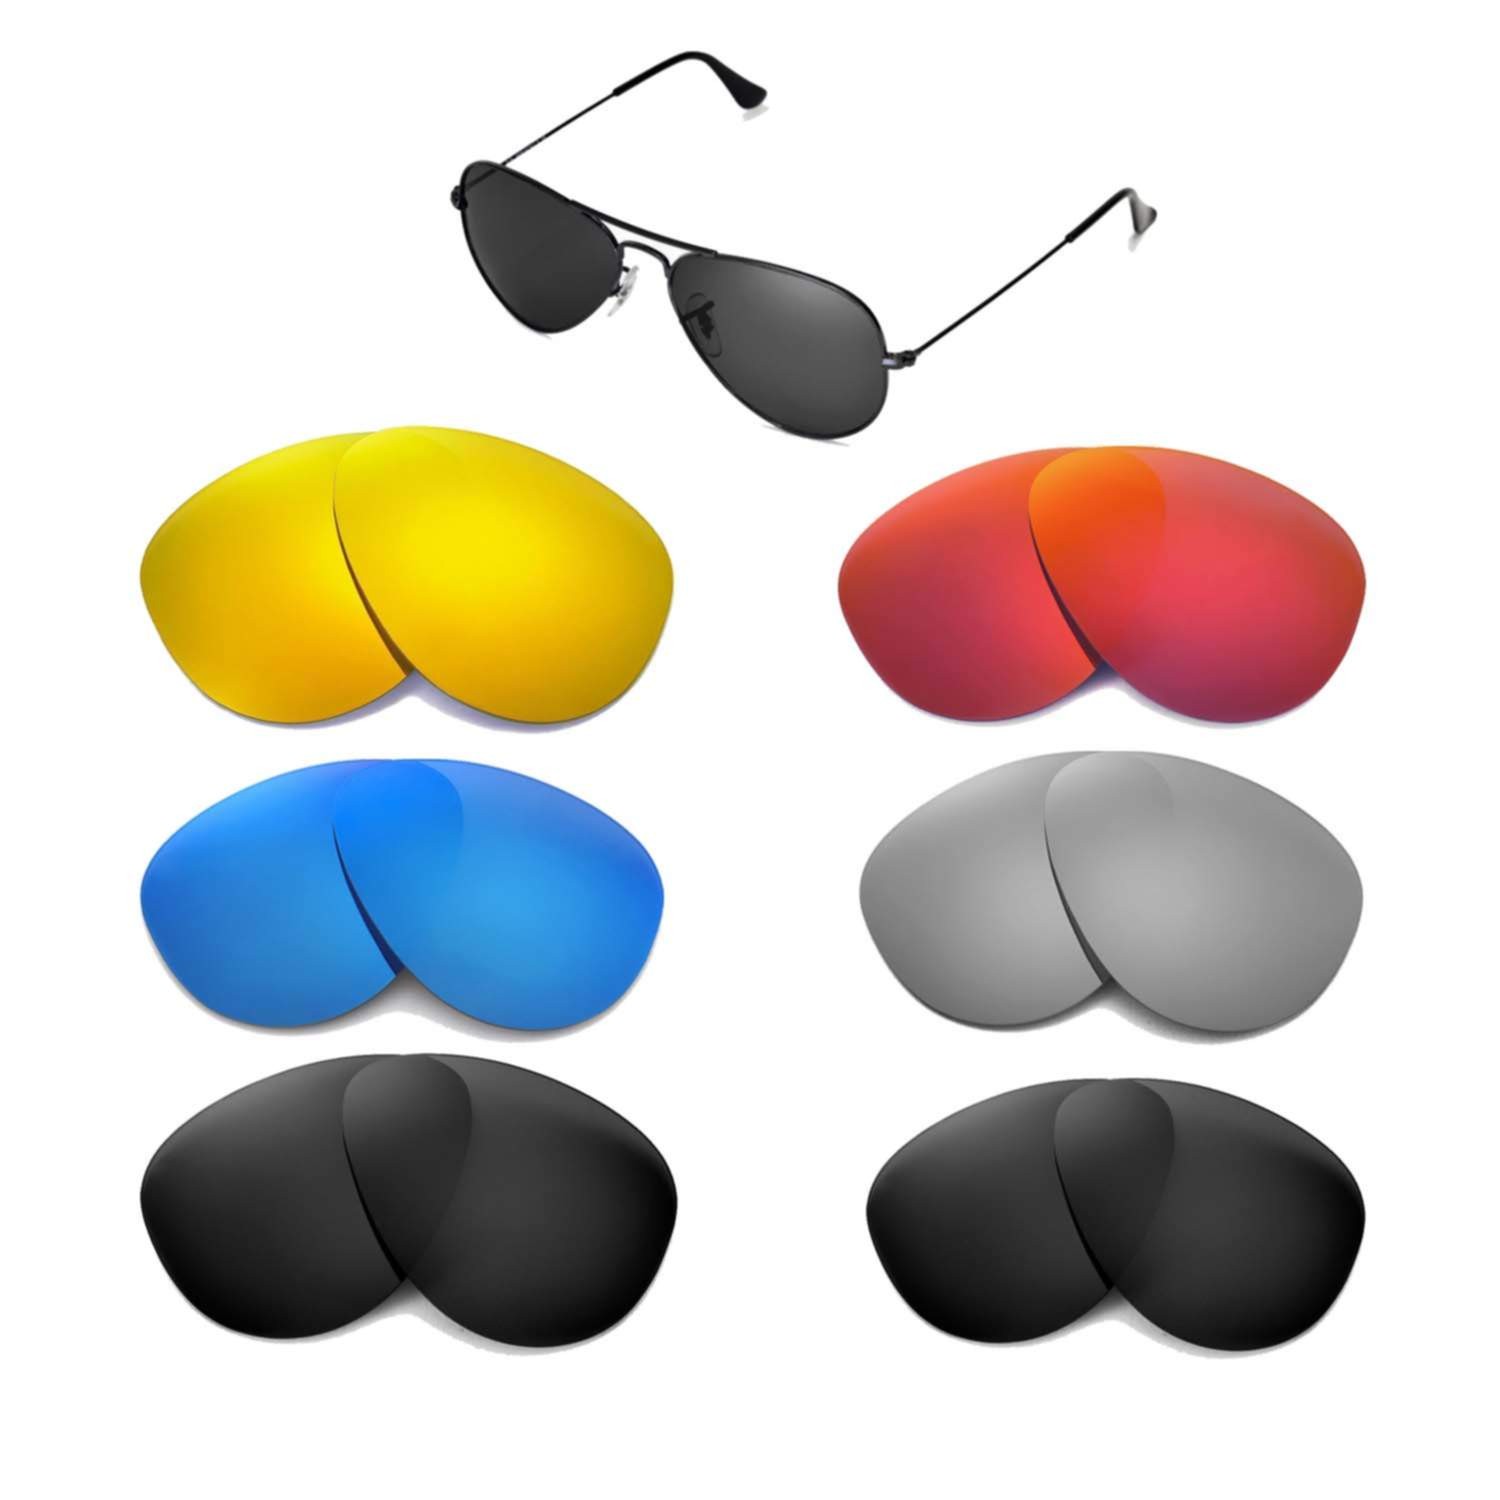 replacement ray ban lenses